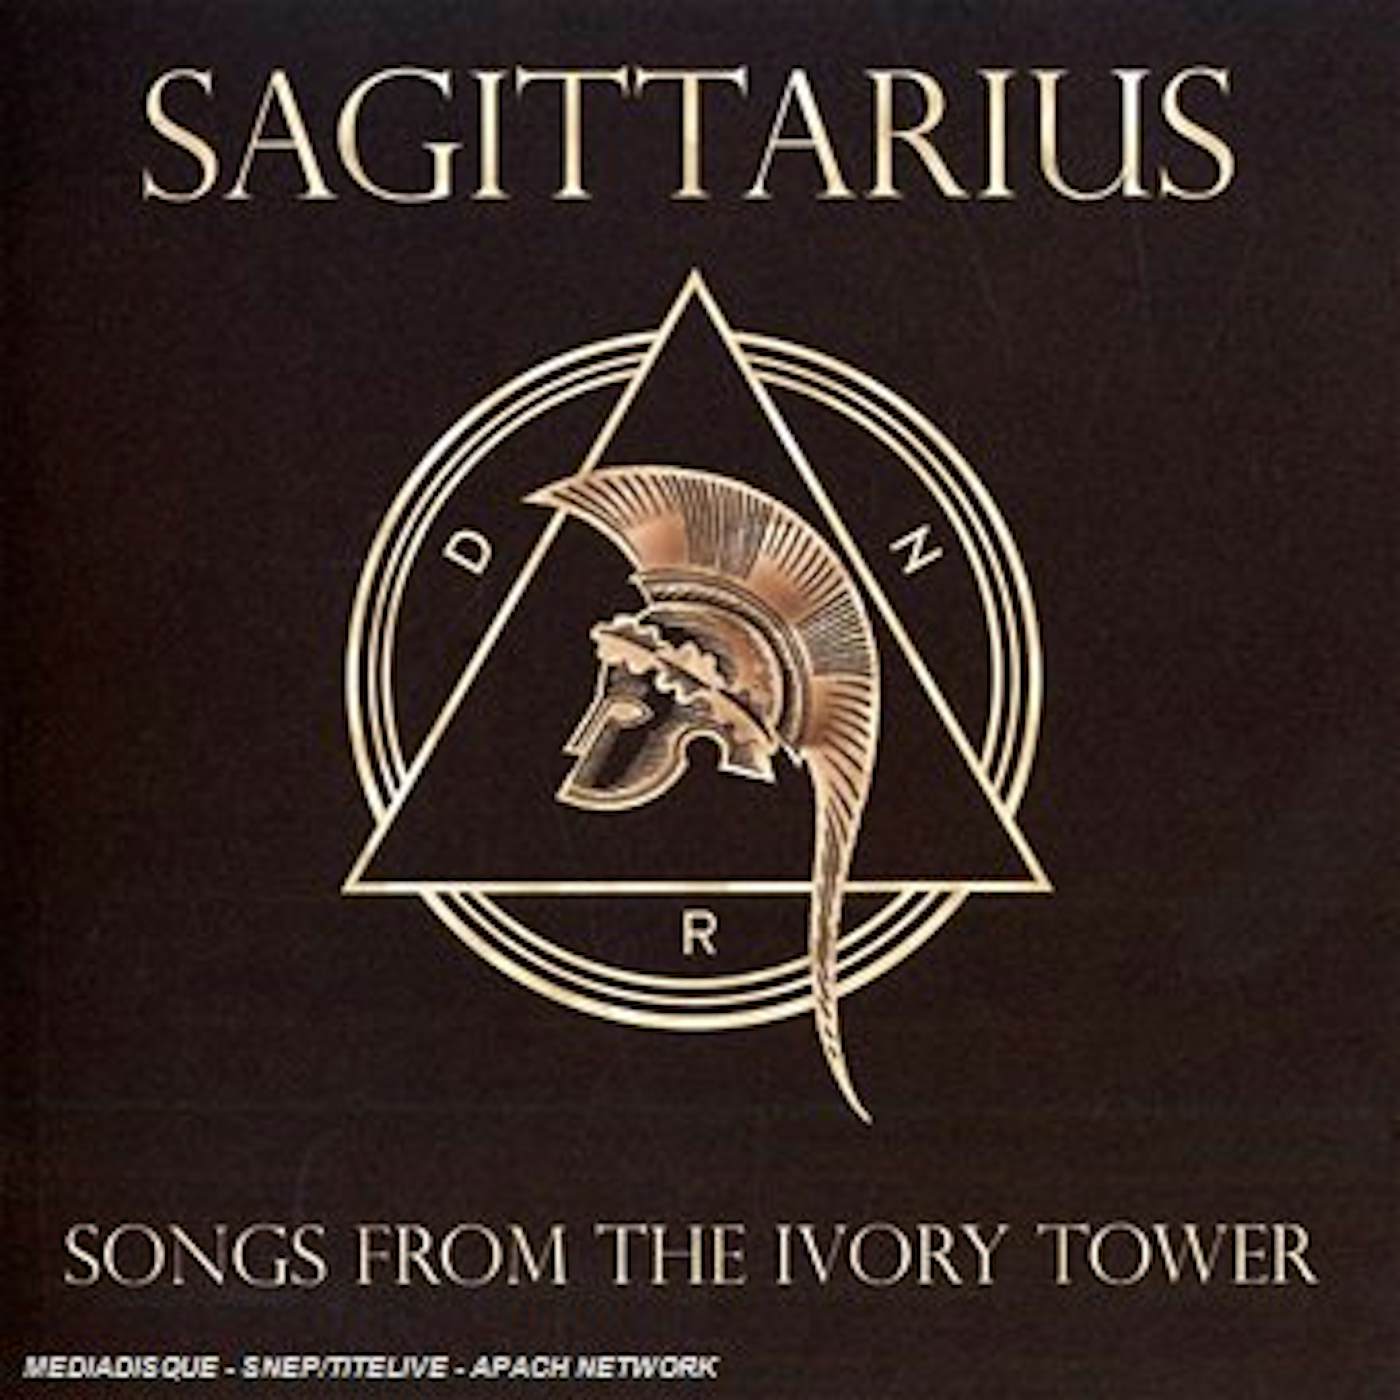 Sagittarius SONGS FROM THE IVORY TOWER CD